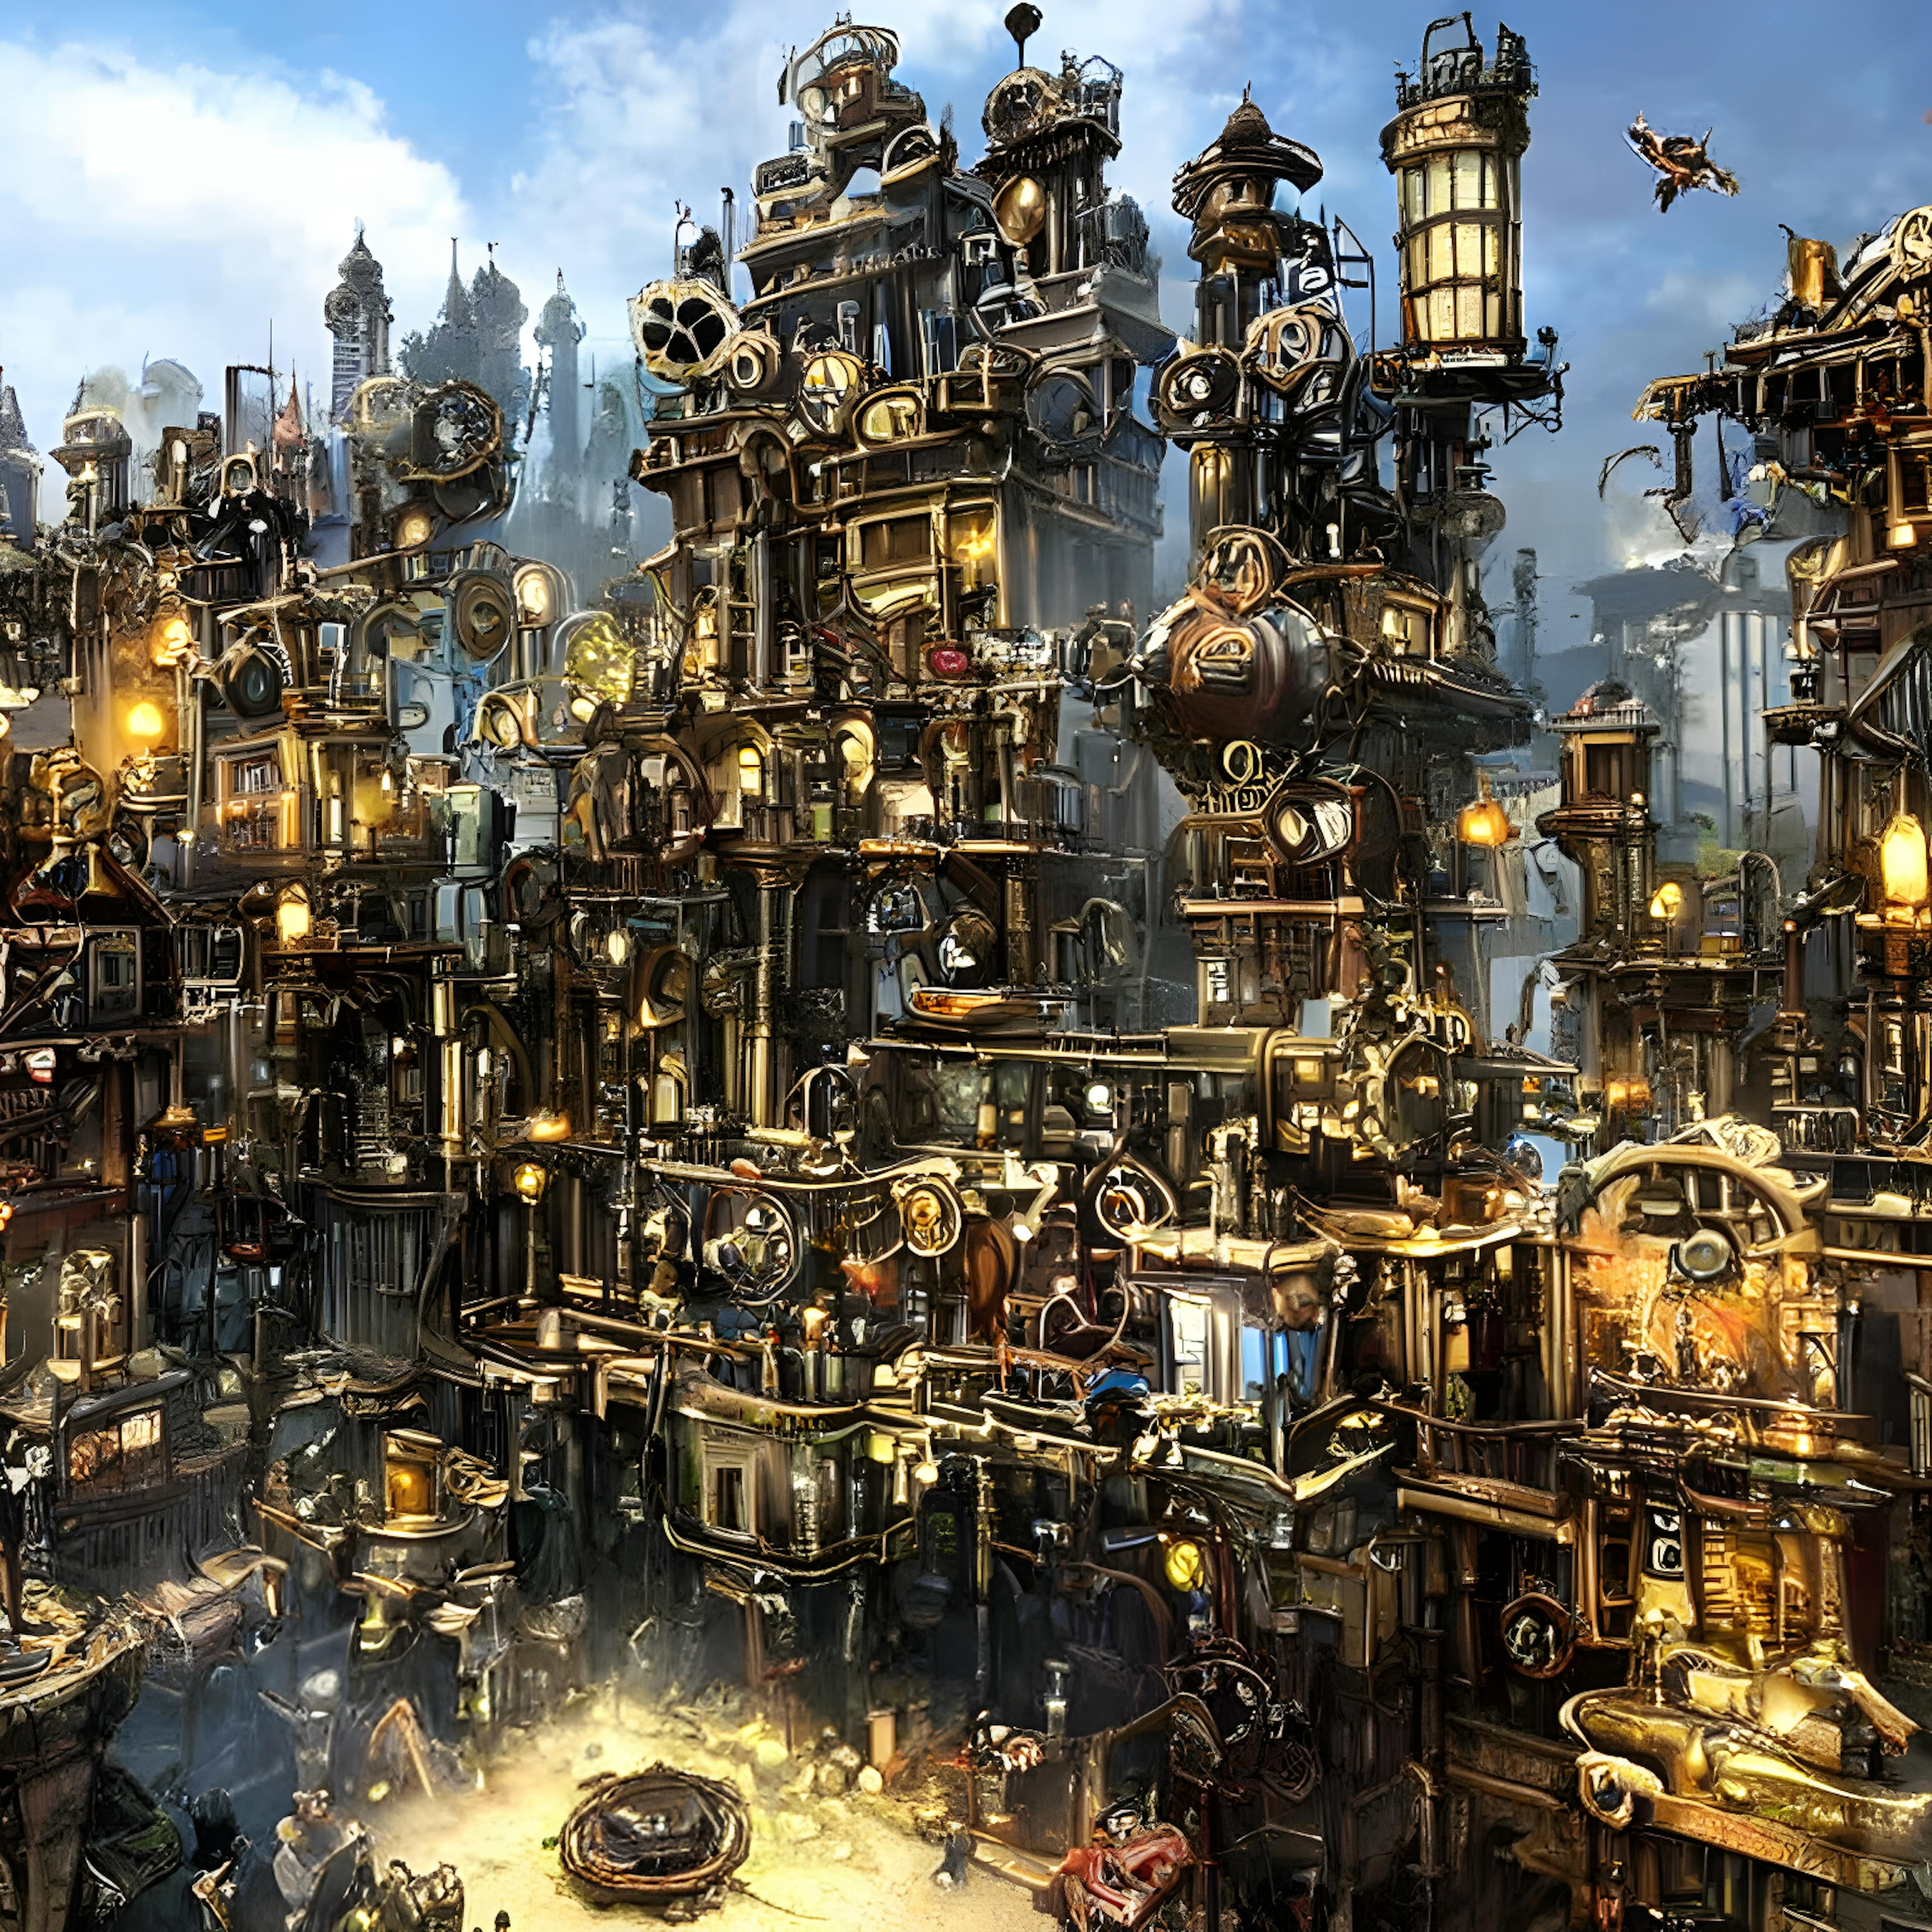 featured image - The History and Aesthetic of Steampunk: Could We Build a Steampunk World?